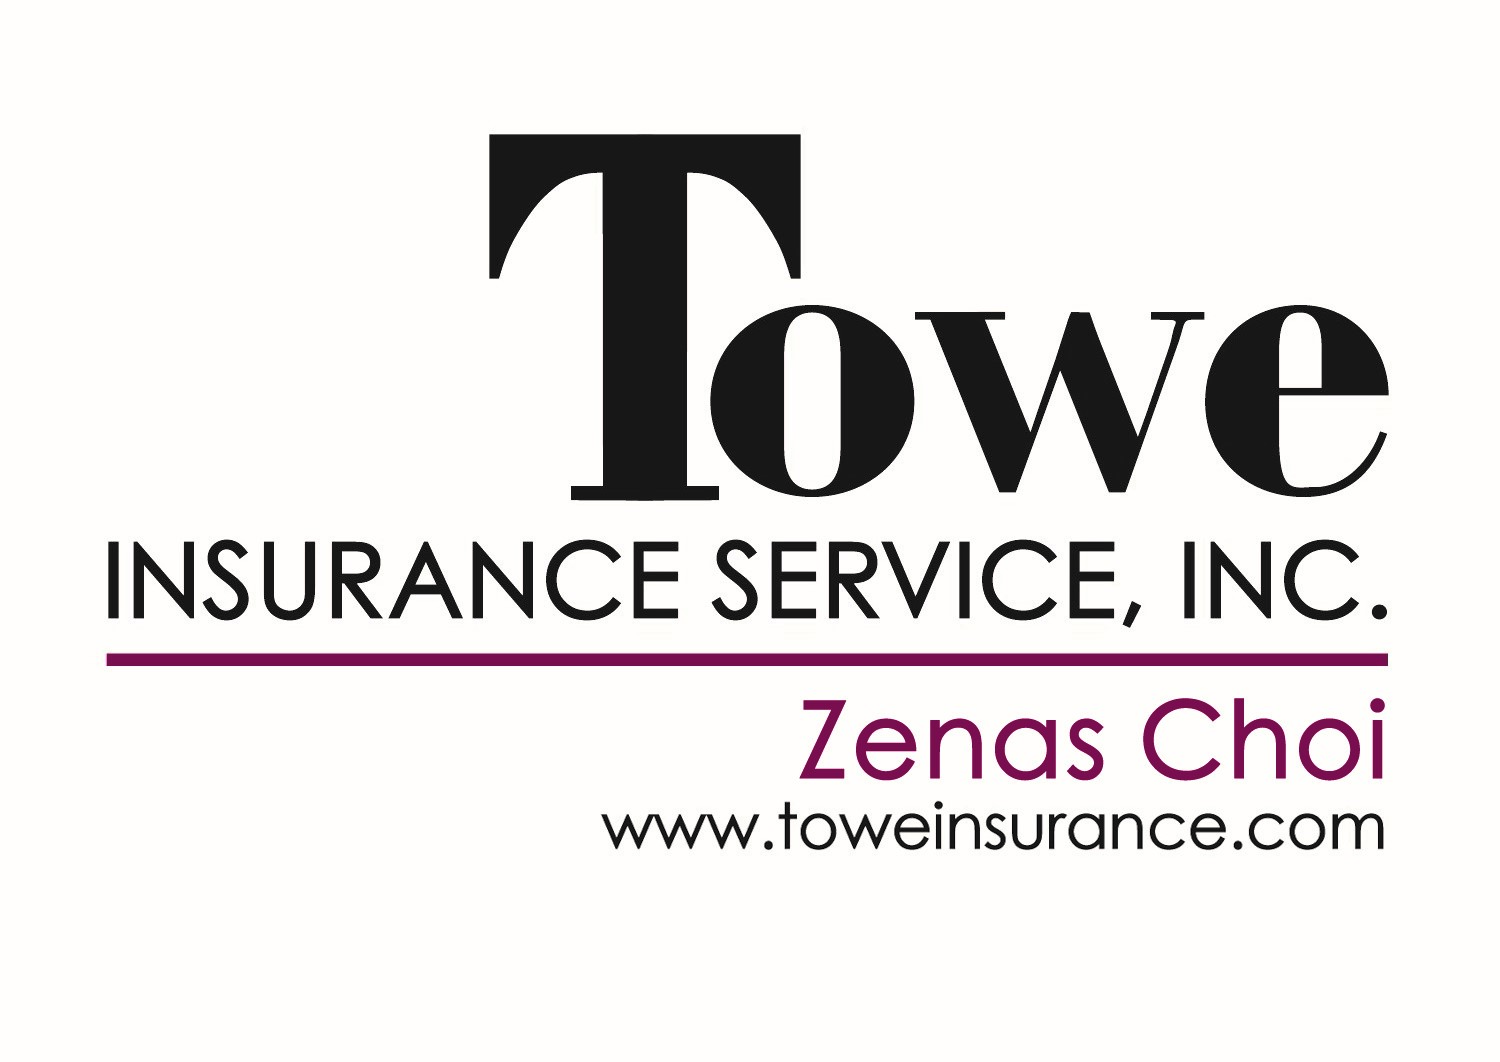 Towe Insurance Services